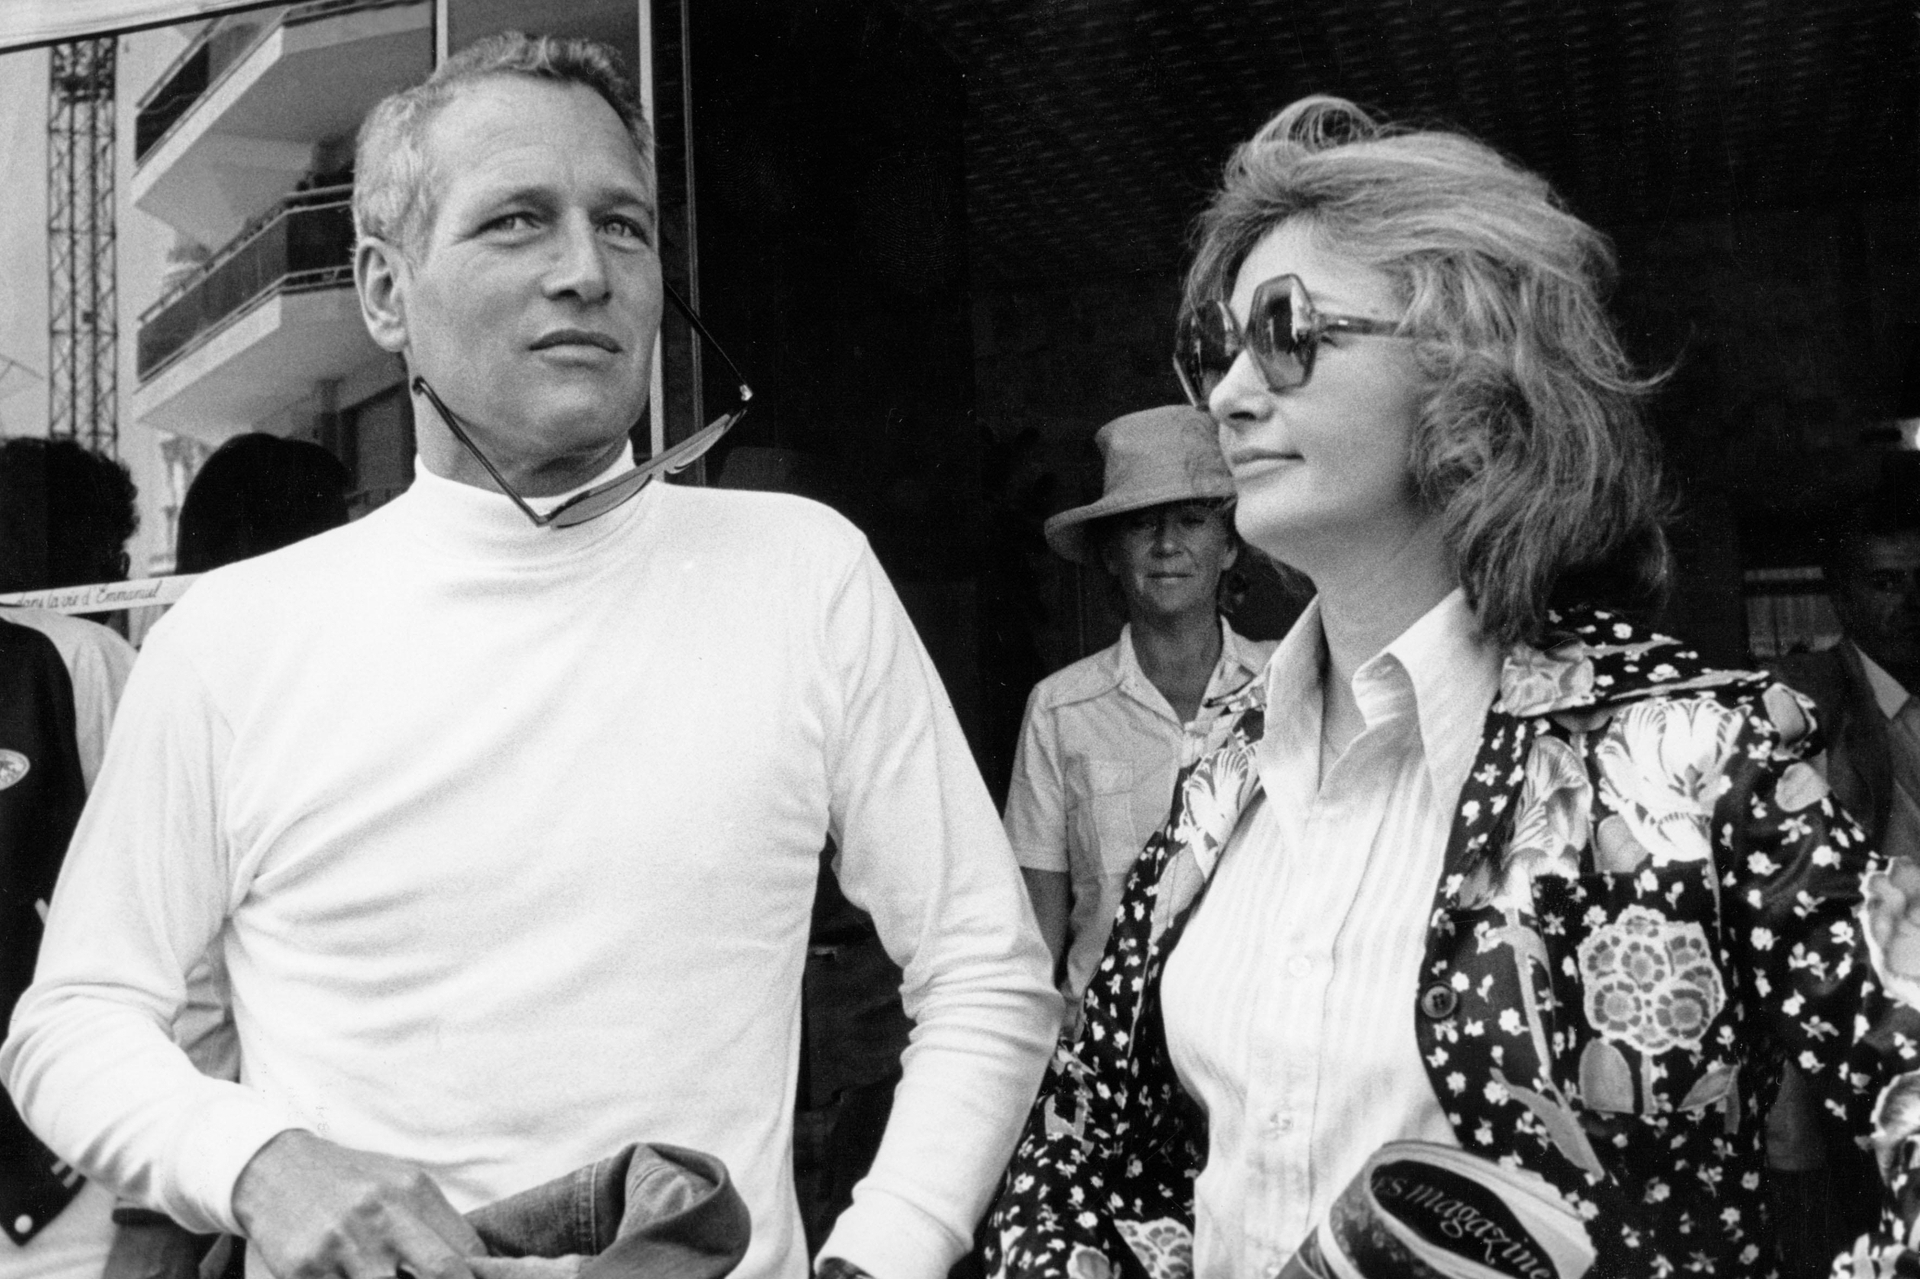 The Last Movie Stars Chapter 4 review Paul Newman and Joanne Woodward